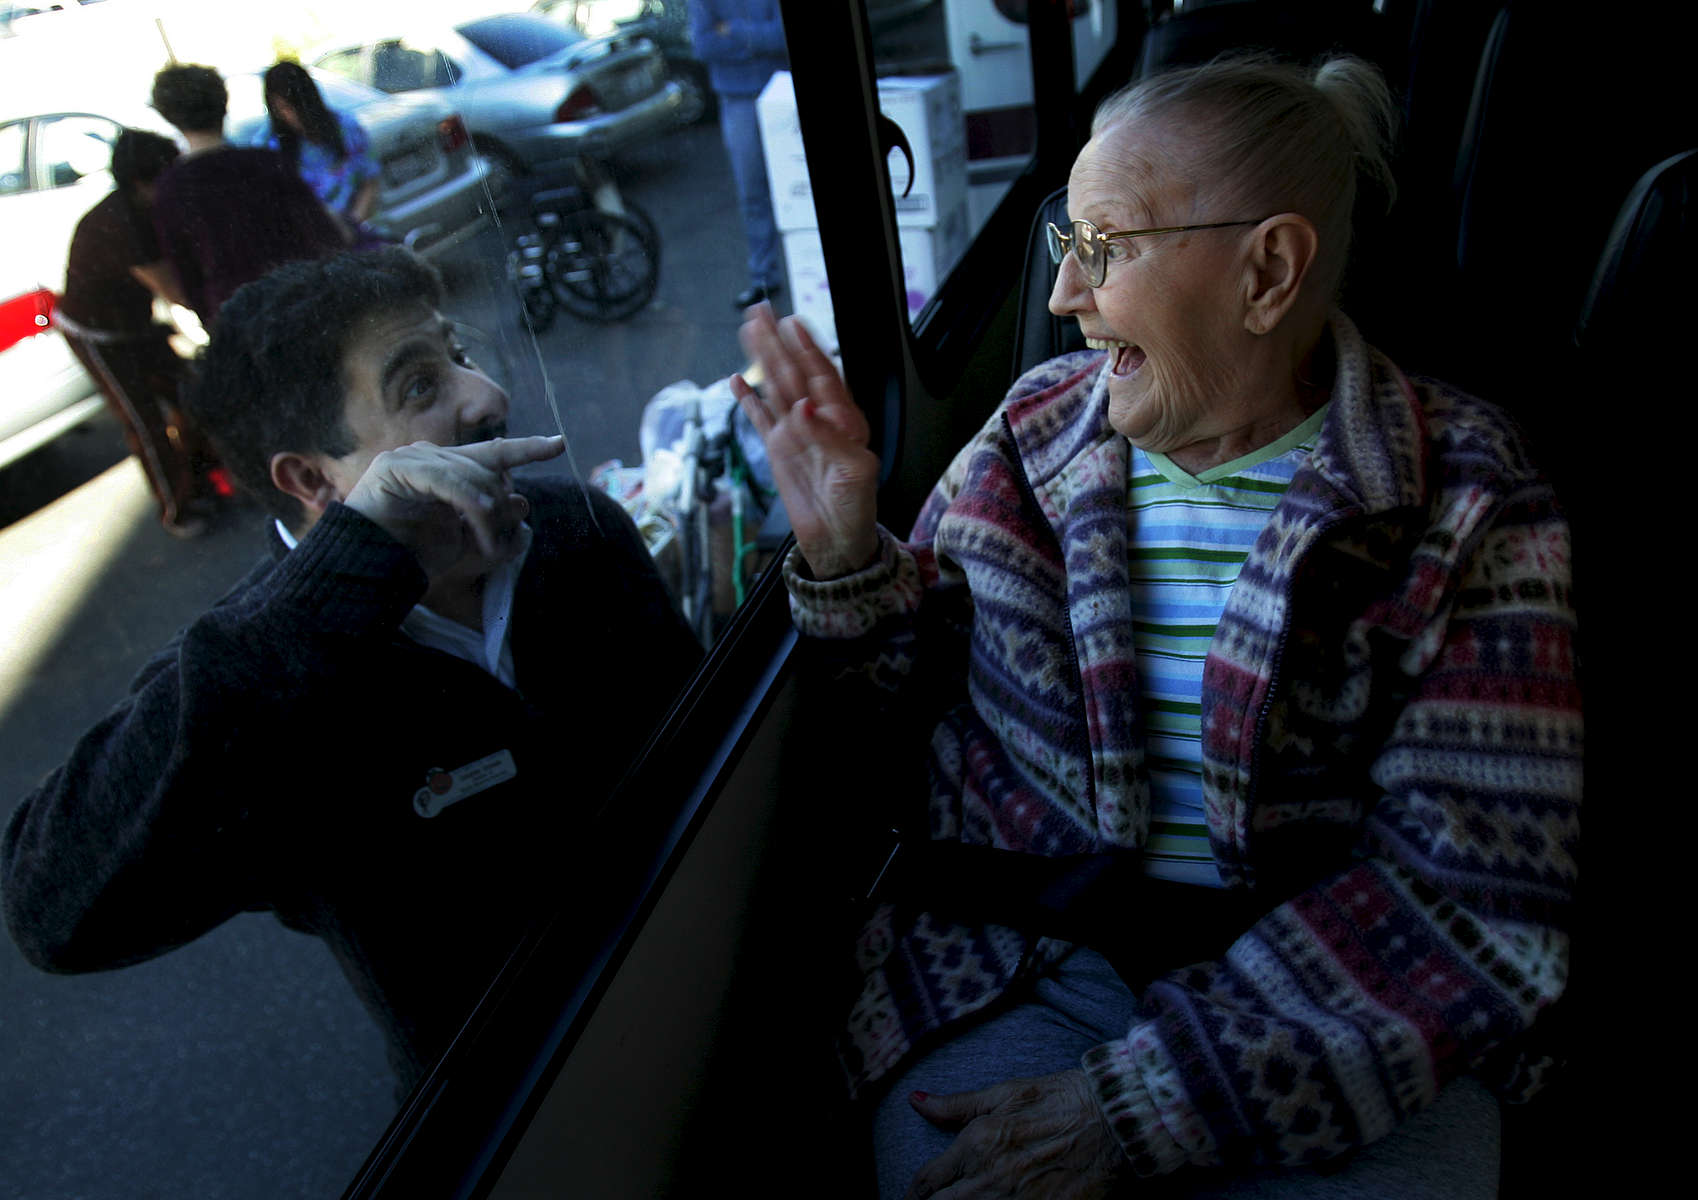 Activity and Social Services Director Edoardo Estradamakes resident Helen Bodo, 91, laugh before Bodo travels to her new home at Bixby Knolls Towers Retirement Residence in Long Beach, Calif. Bodo had lived at Plymouth Towers for over 10 years. (The Press-Enterprise/ Mark Zaleski)